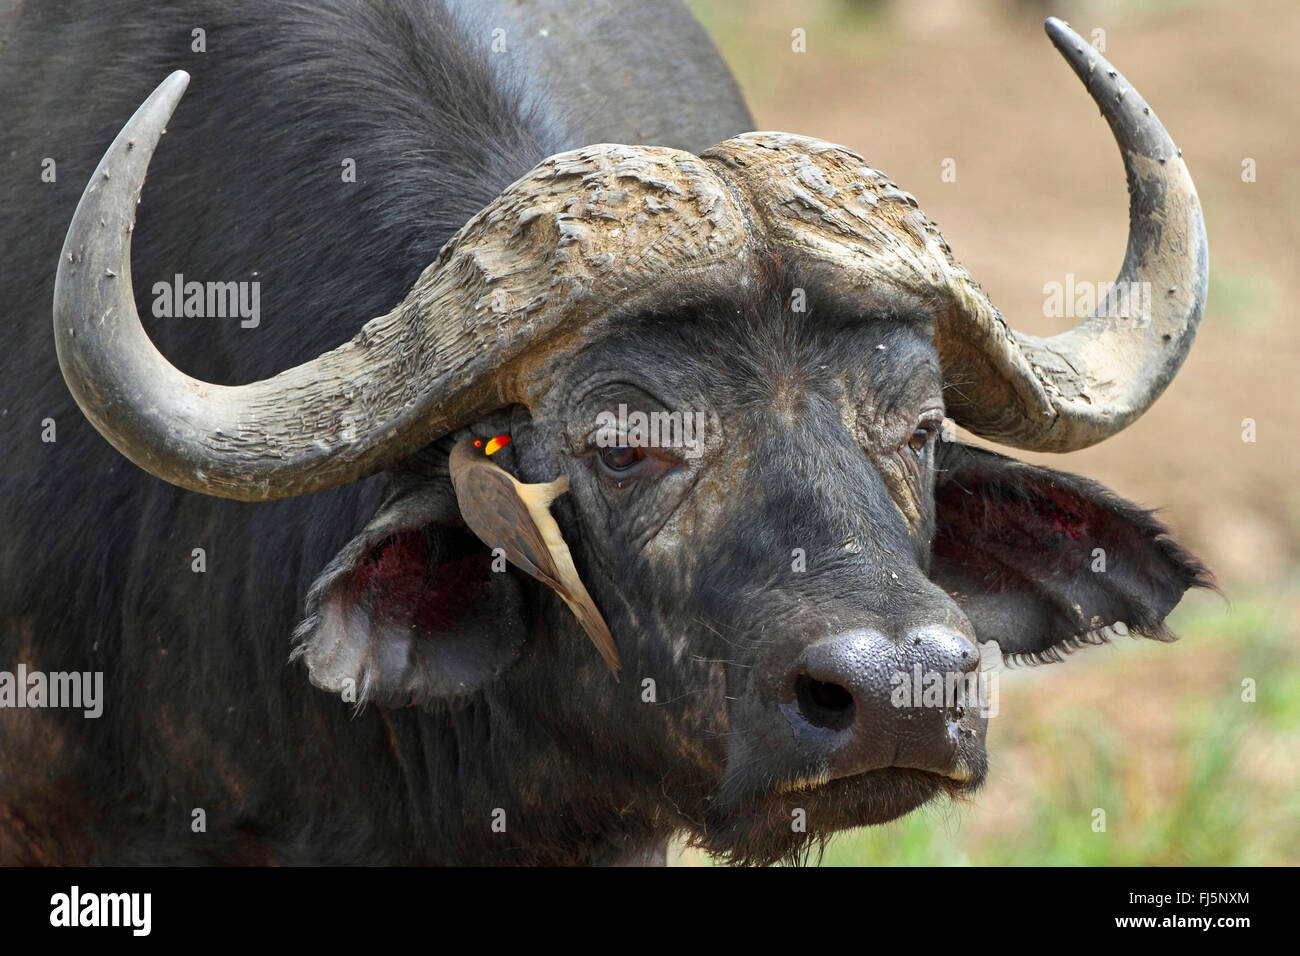 Close View Buffalo High Resolution Stock Photography and - Alamy